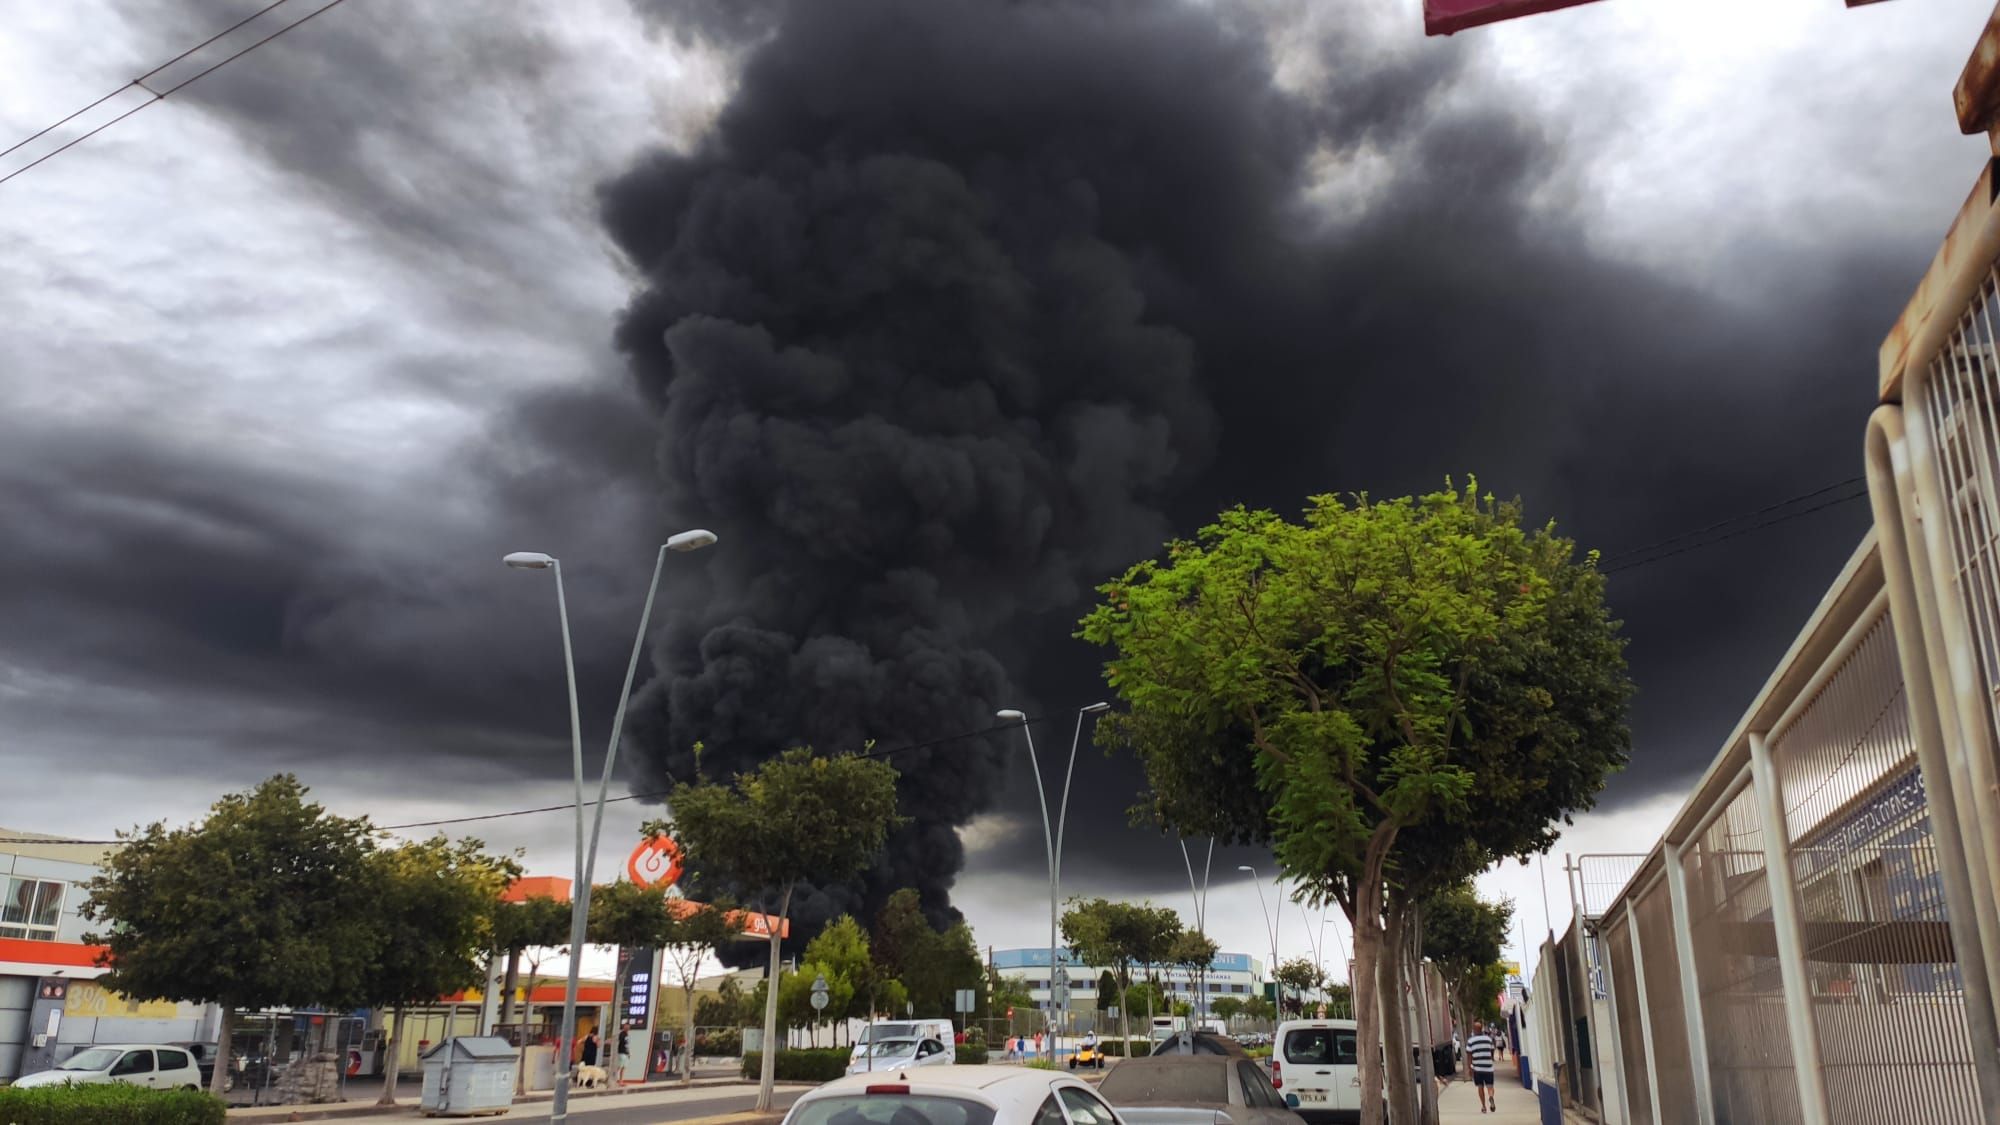 Shocking images of the San Vicente del Raspeig factory fire